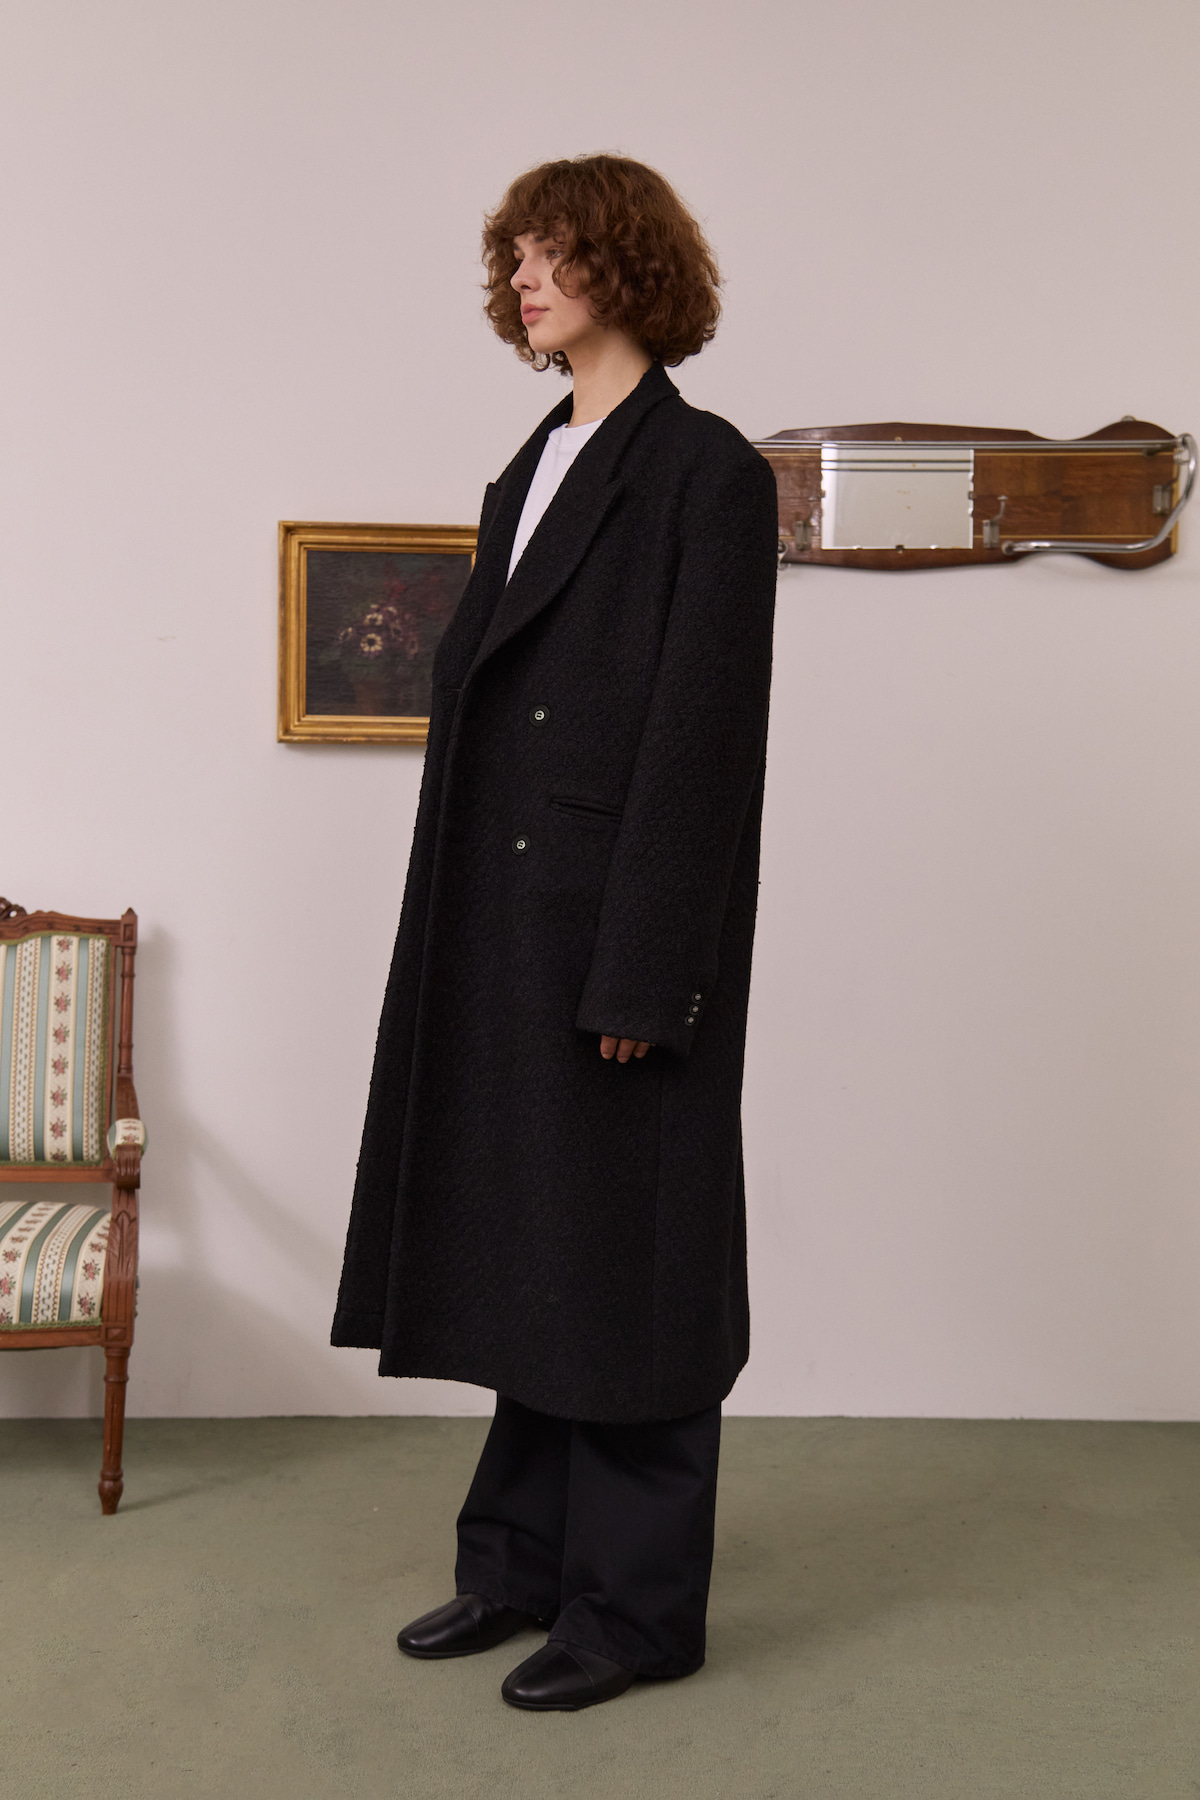 Overfit Double - Breasted Coat Black (12월 9일 순차 발송)